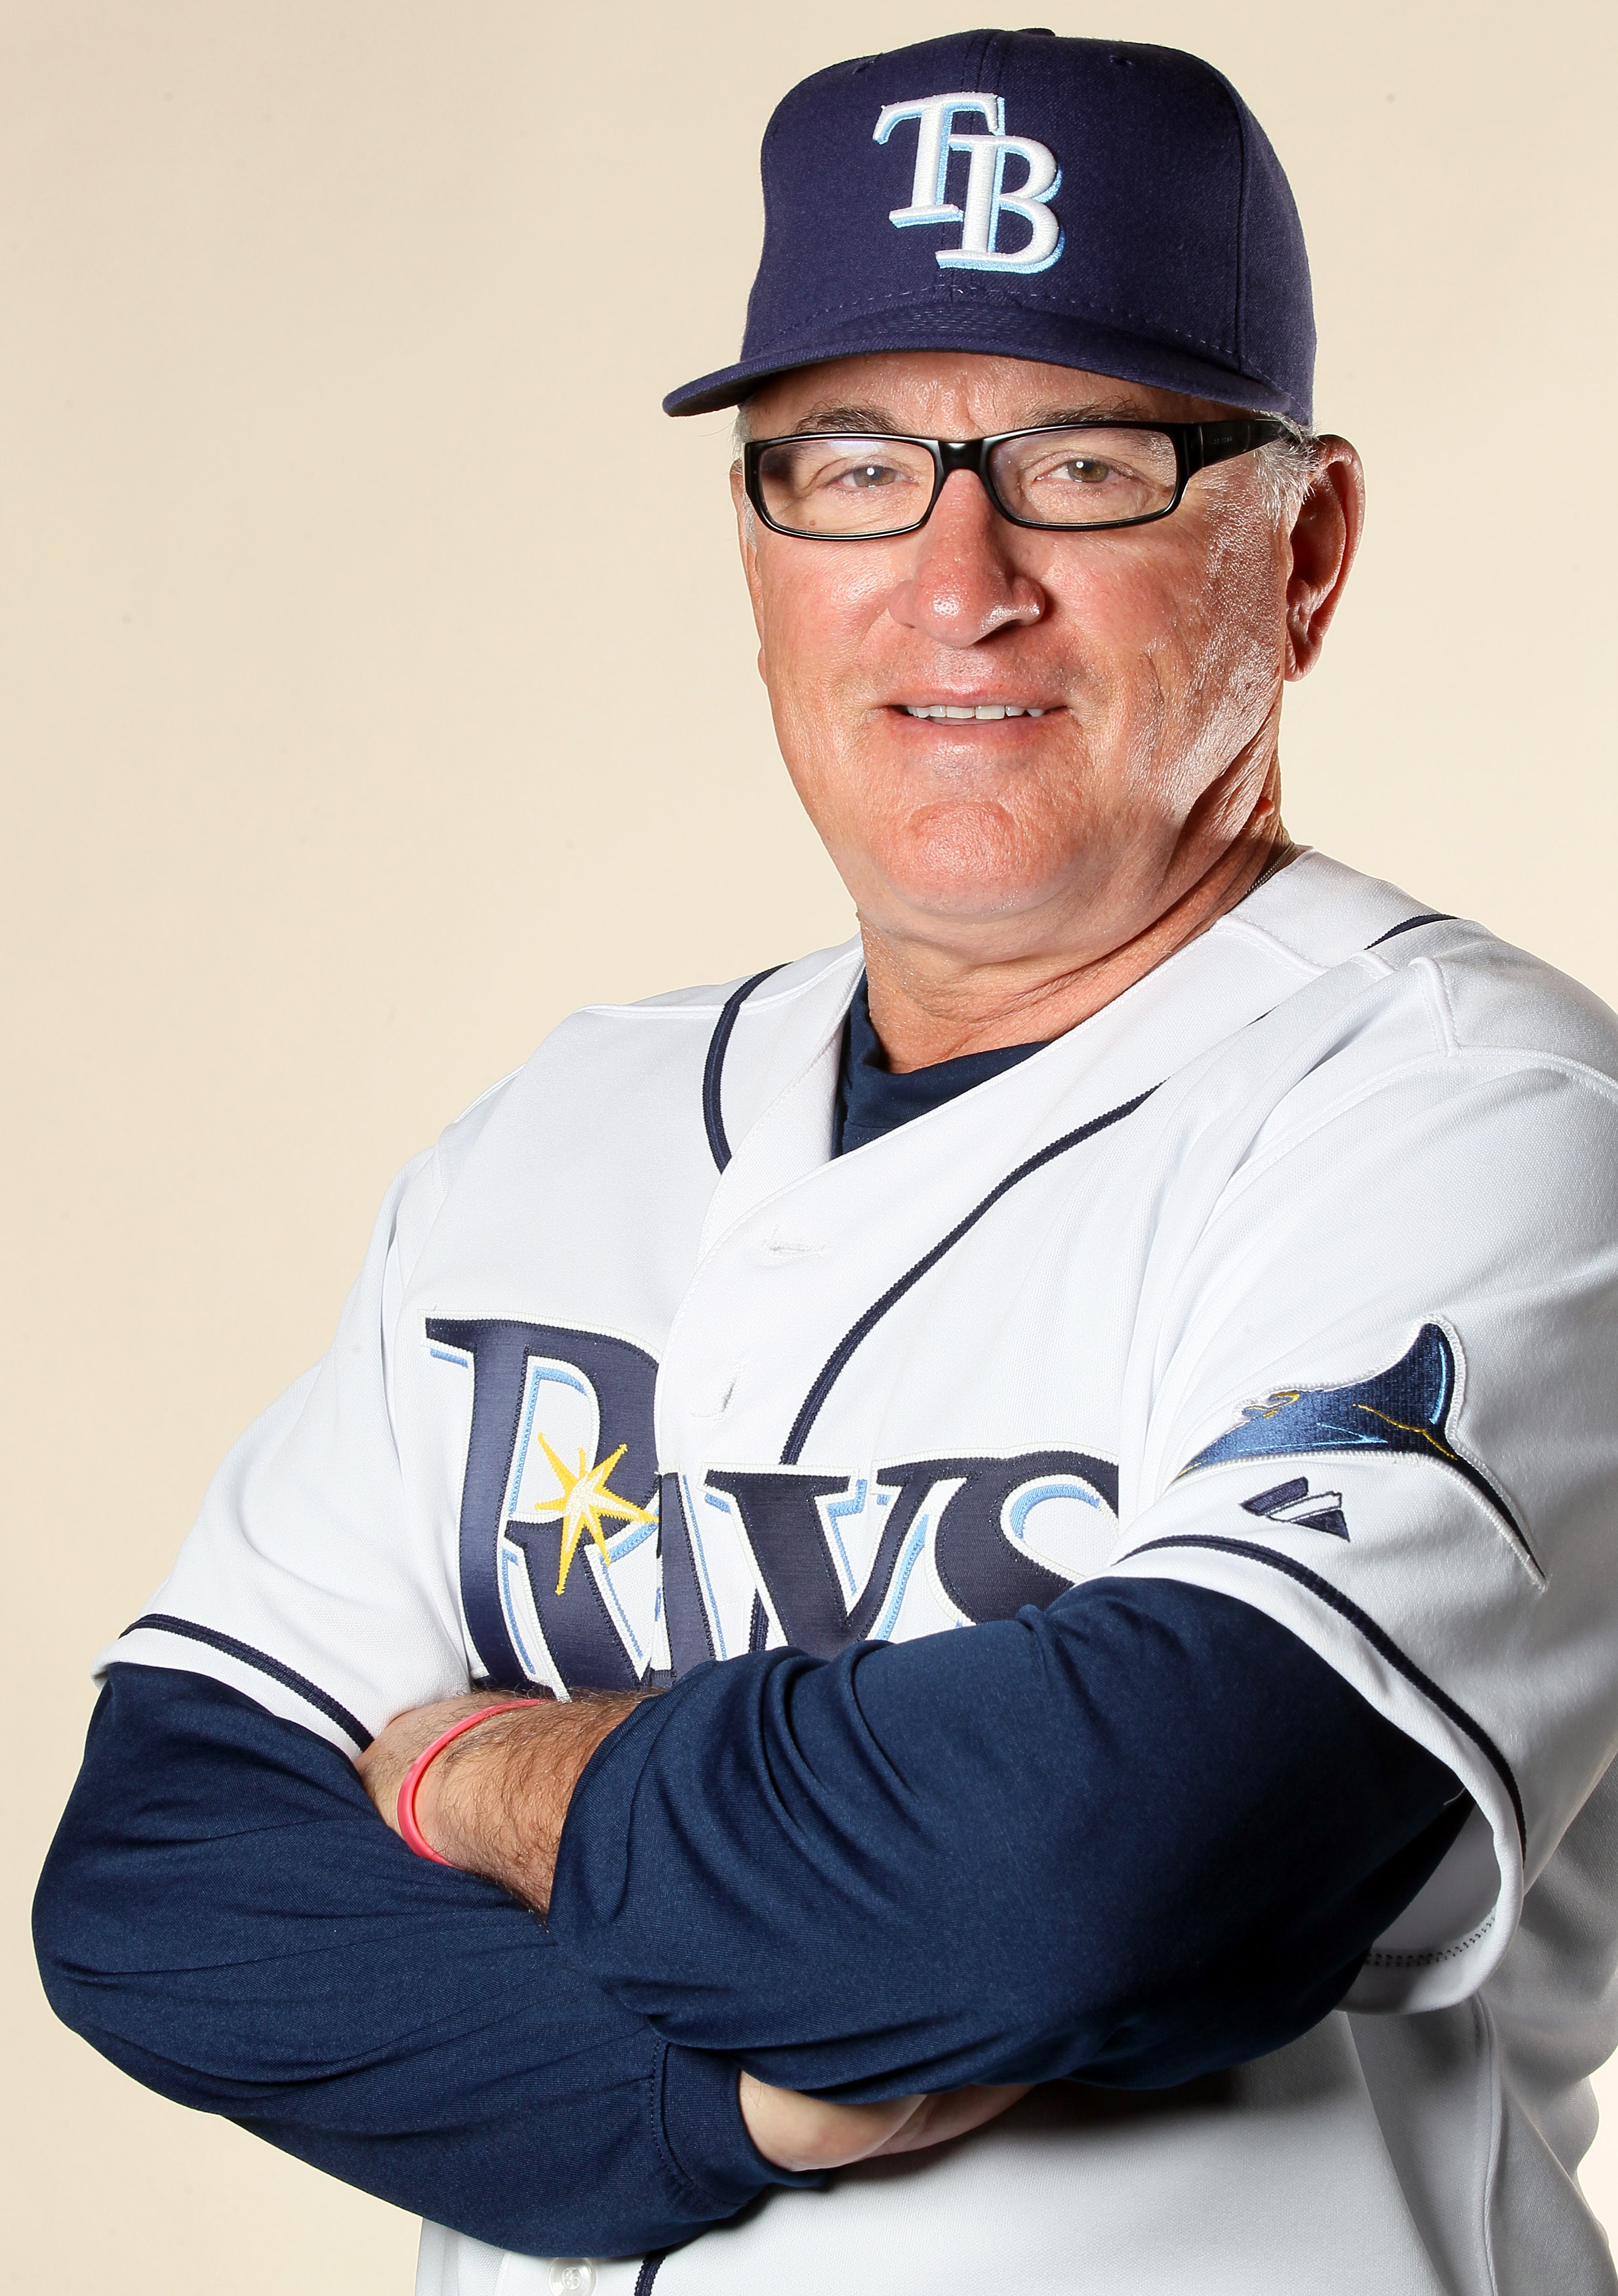 FT. MYERS, FL - FEBRUARY 22:  Joe Maddon #70 of the Tampa Bay Rays poses for a portrait during the Tampa Bay Rays Photo Day on February 22, 2011 at the Charlotte Sports Complex in Port Charlotte, Florida.  (Photo by Elsa/Getty Images)